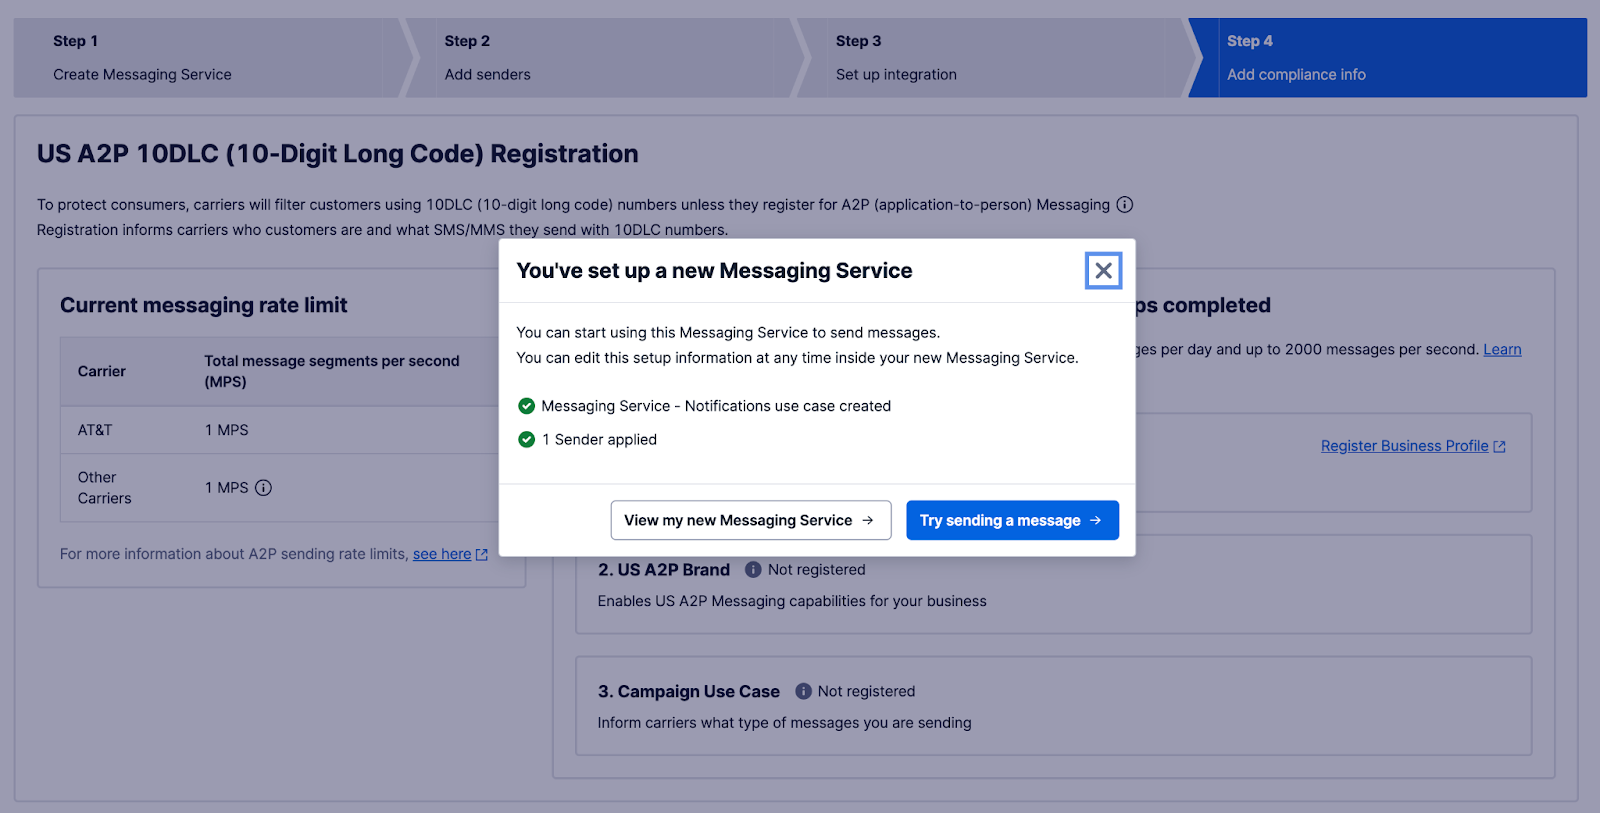 Step 4 of the Messaging Service Setup wizard, showing that it is completed.